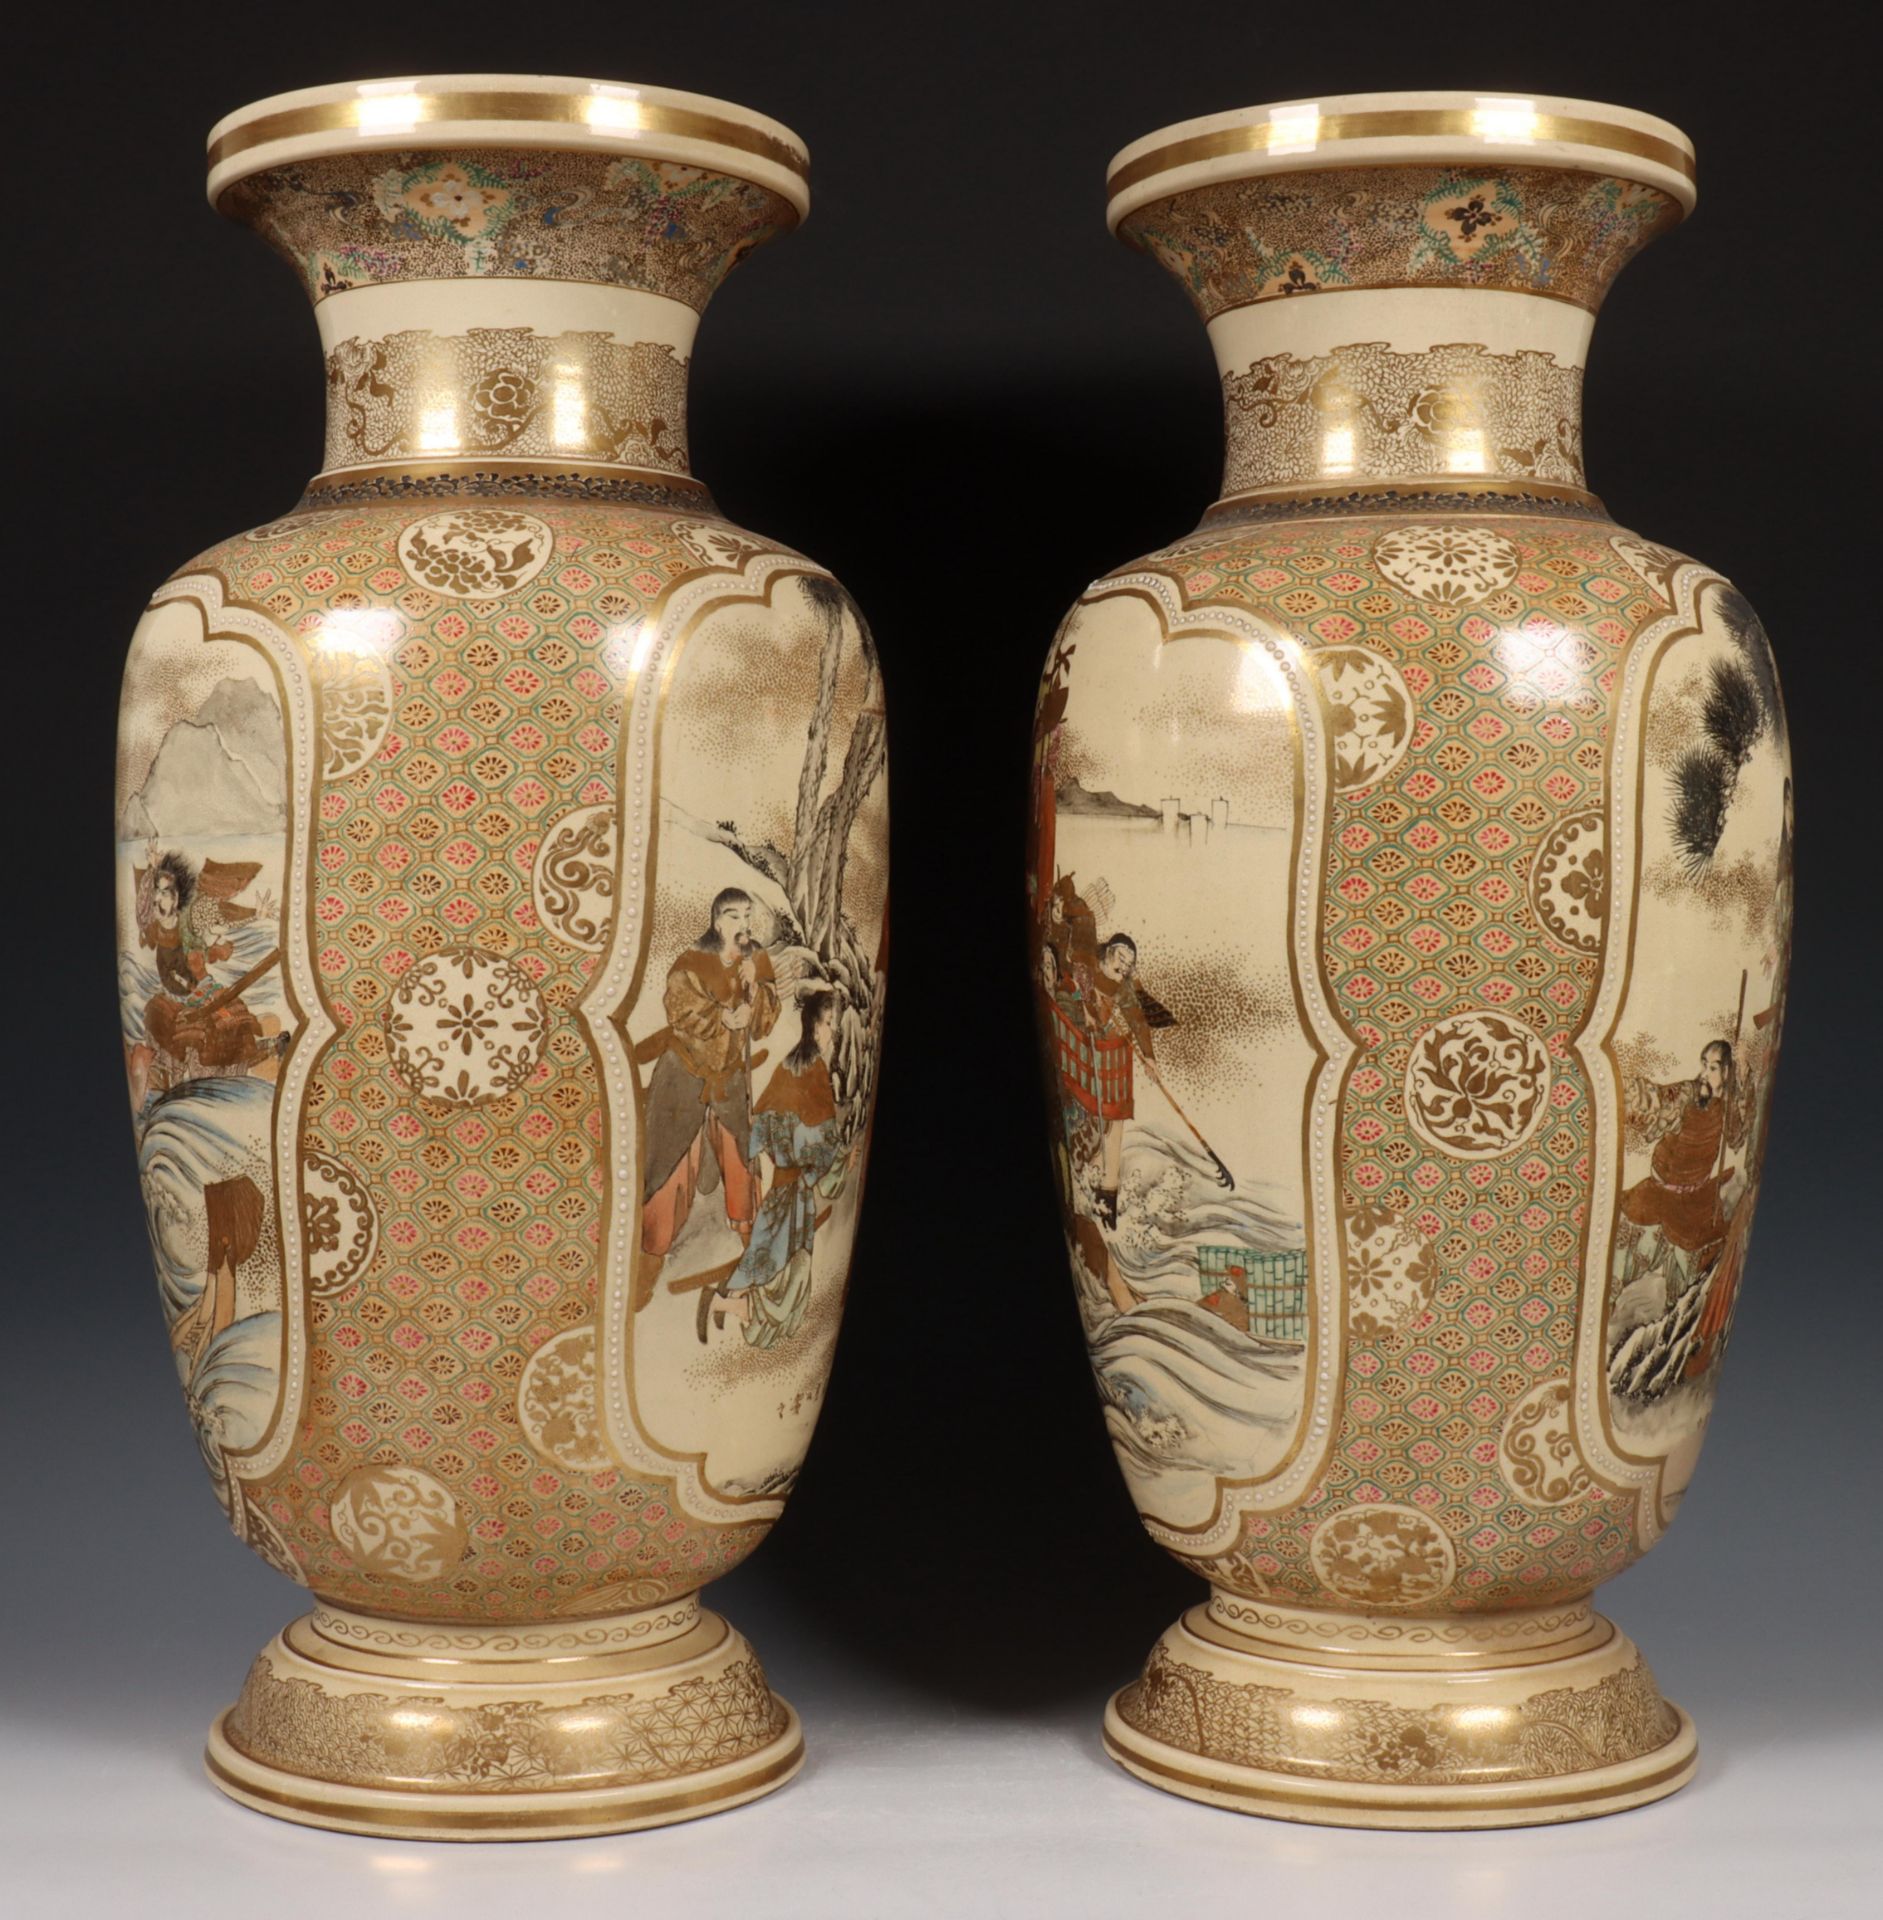 Japan, two Satsuma baluster vases, late 19th century, variously decorated with scenes of Samurai - Image 6 of 7